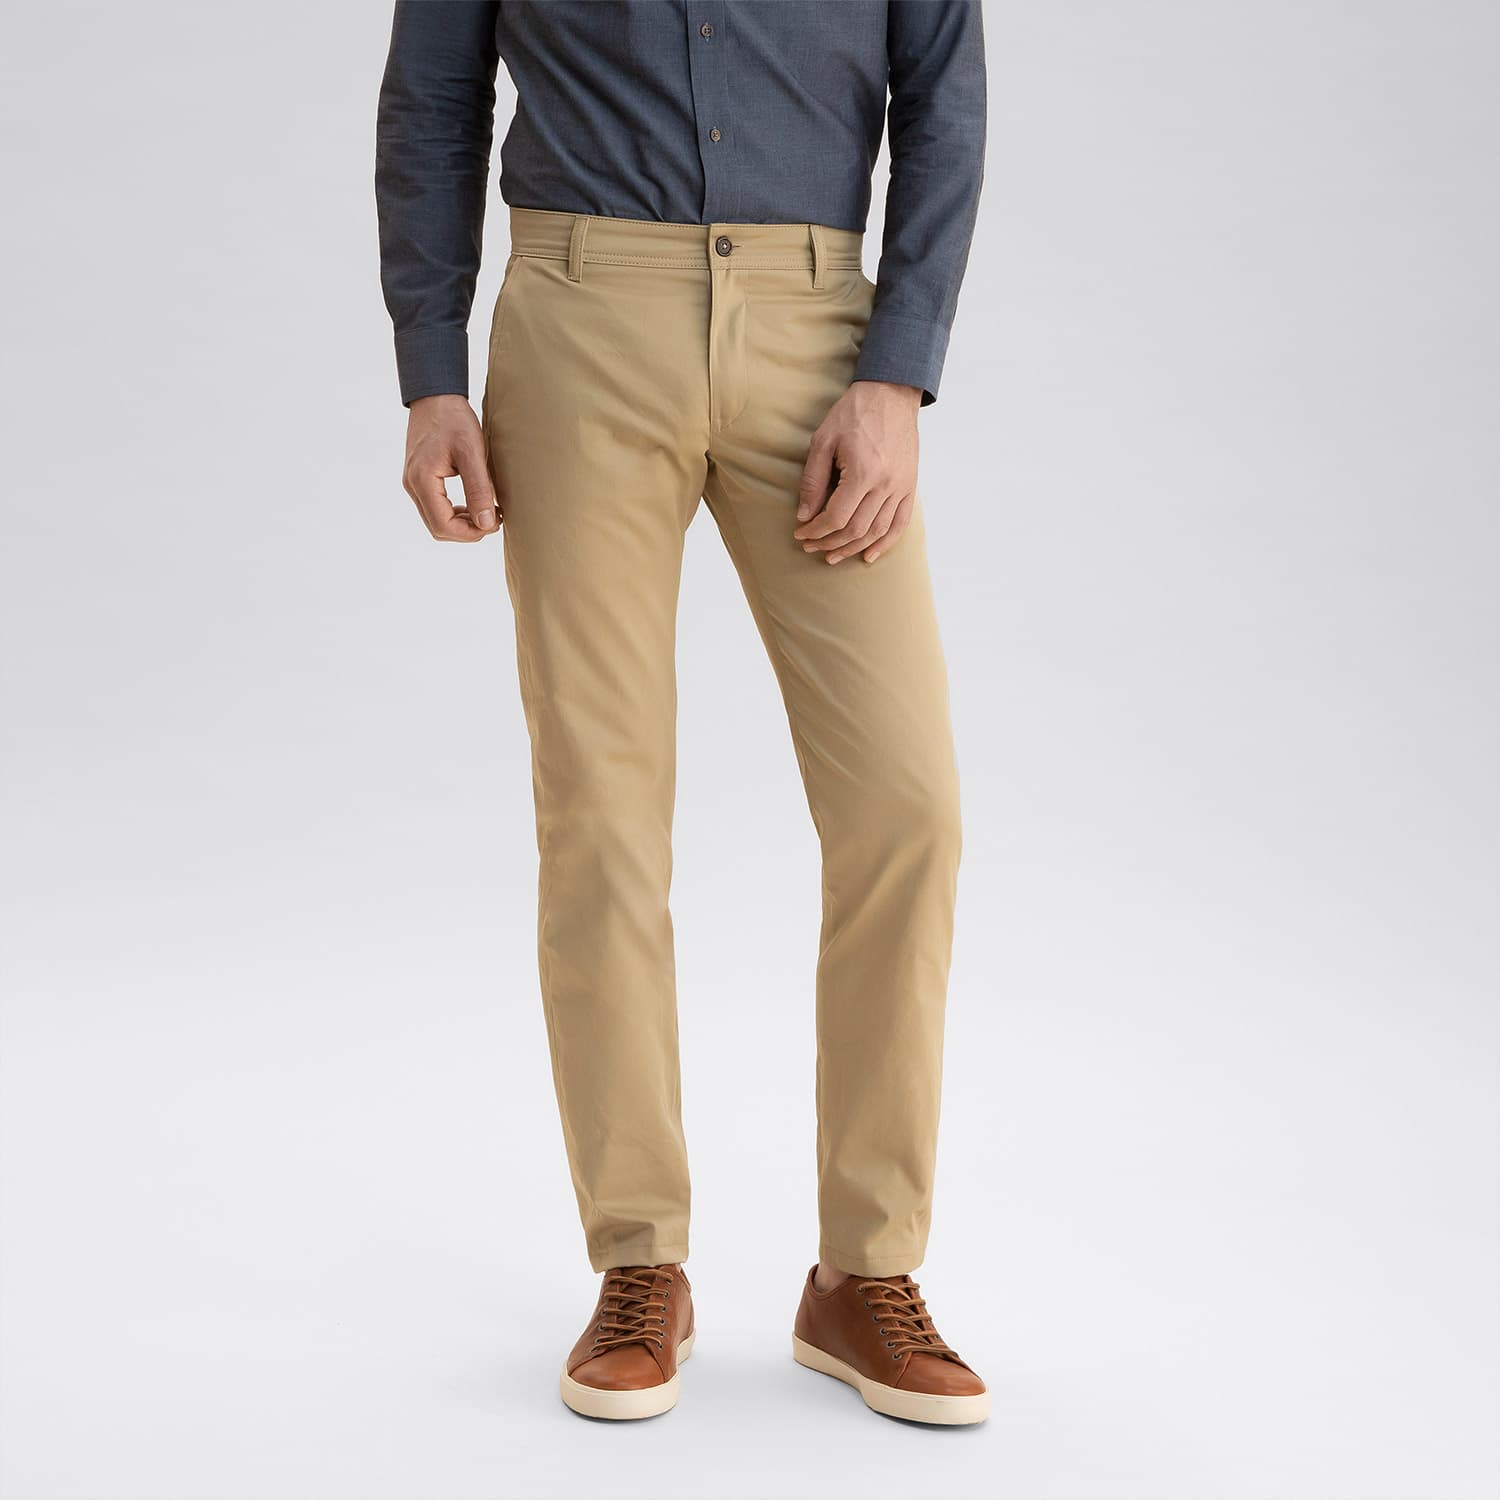 Pant Leg Opening, An Overview - Todd Shelton Blog